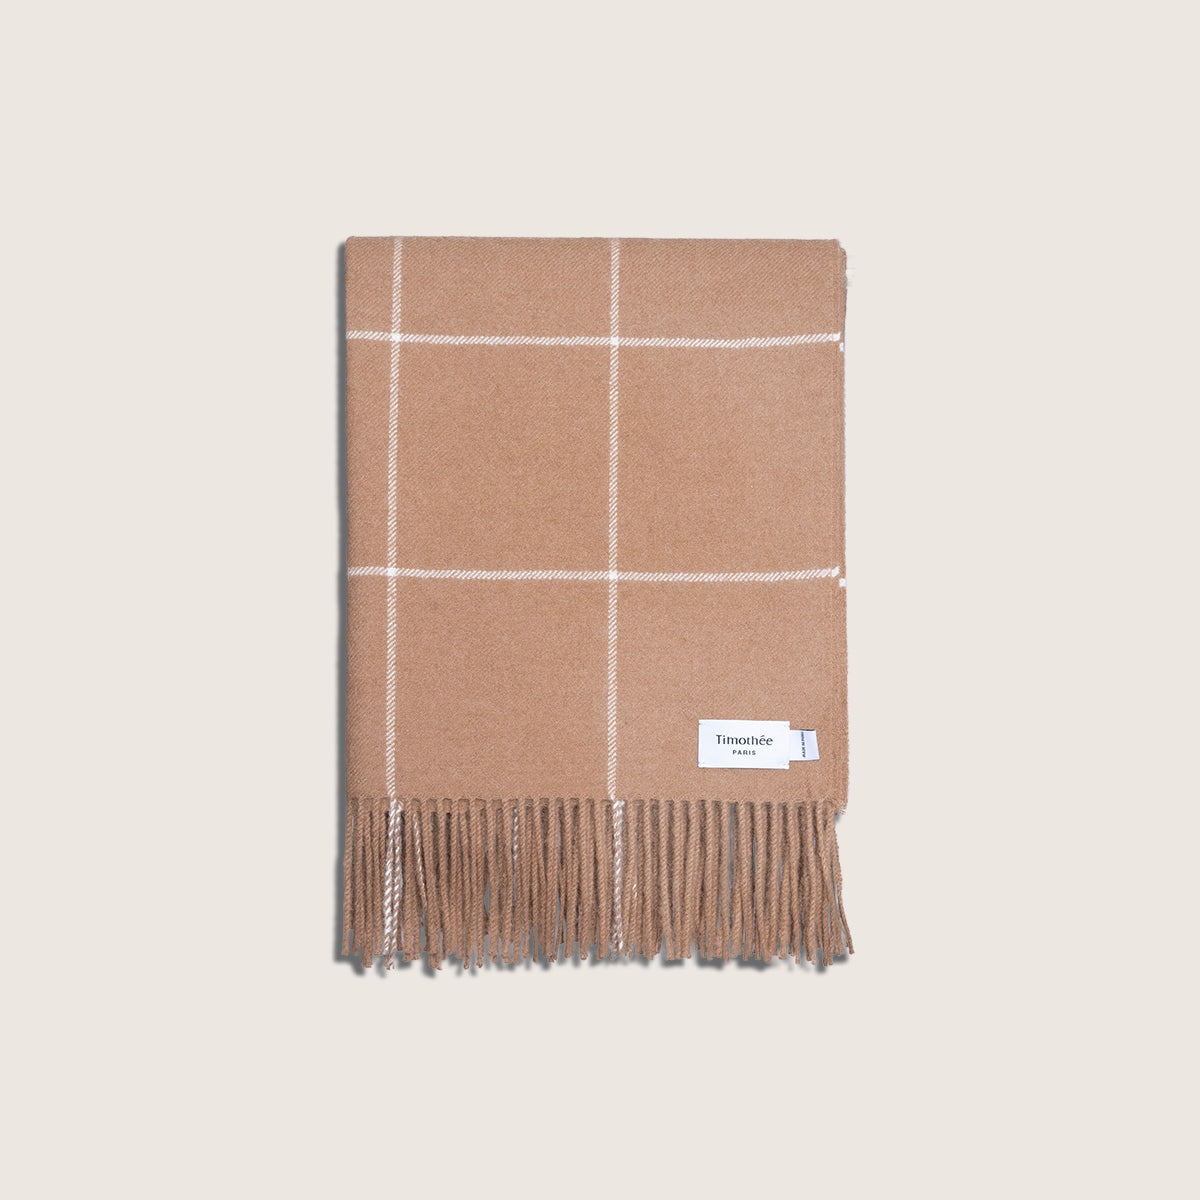 brown alpaca blanket by french-lifestyle brand timothee paris front view